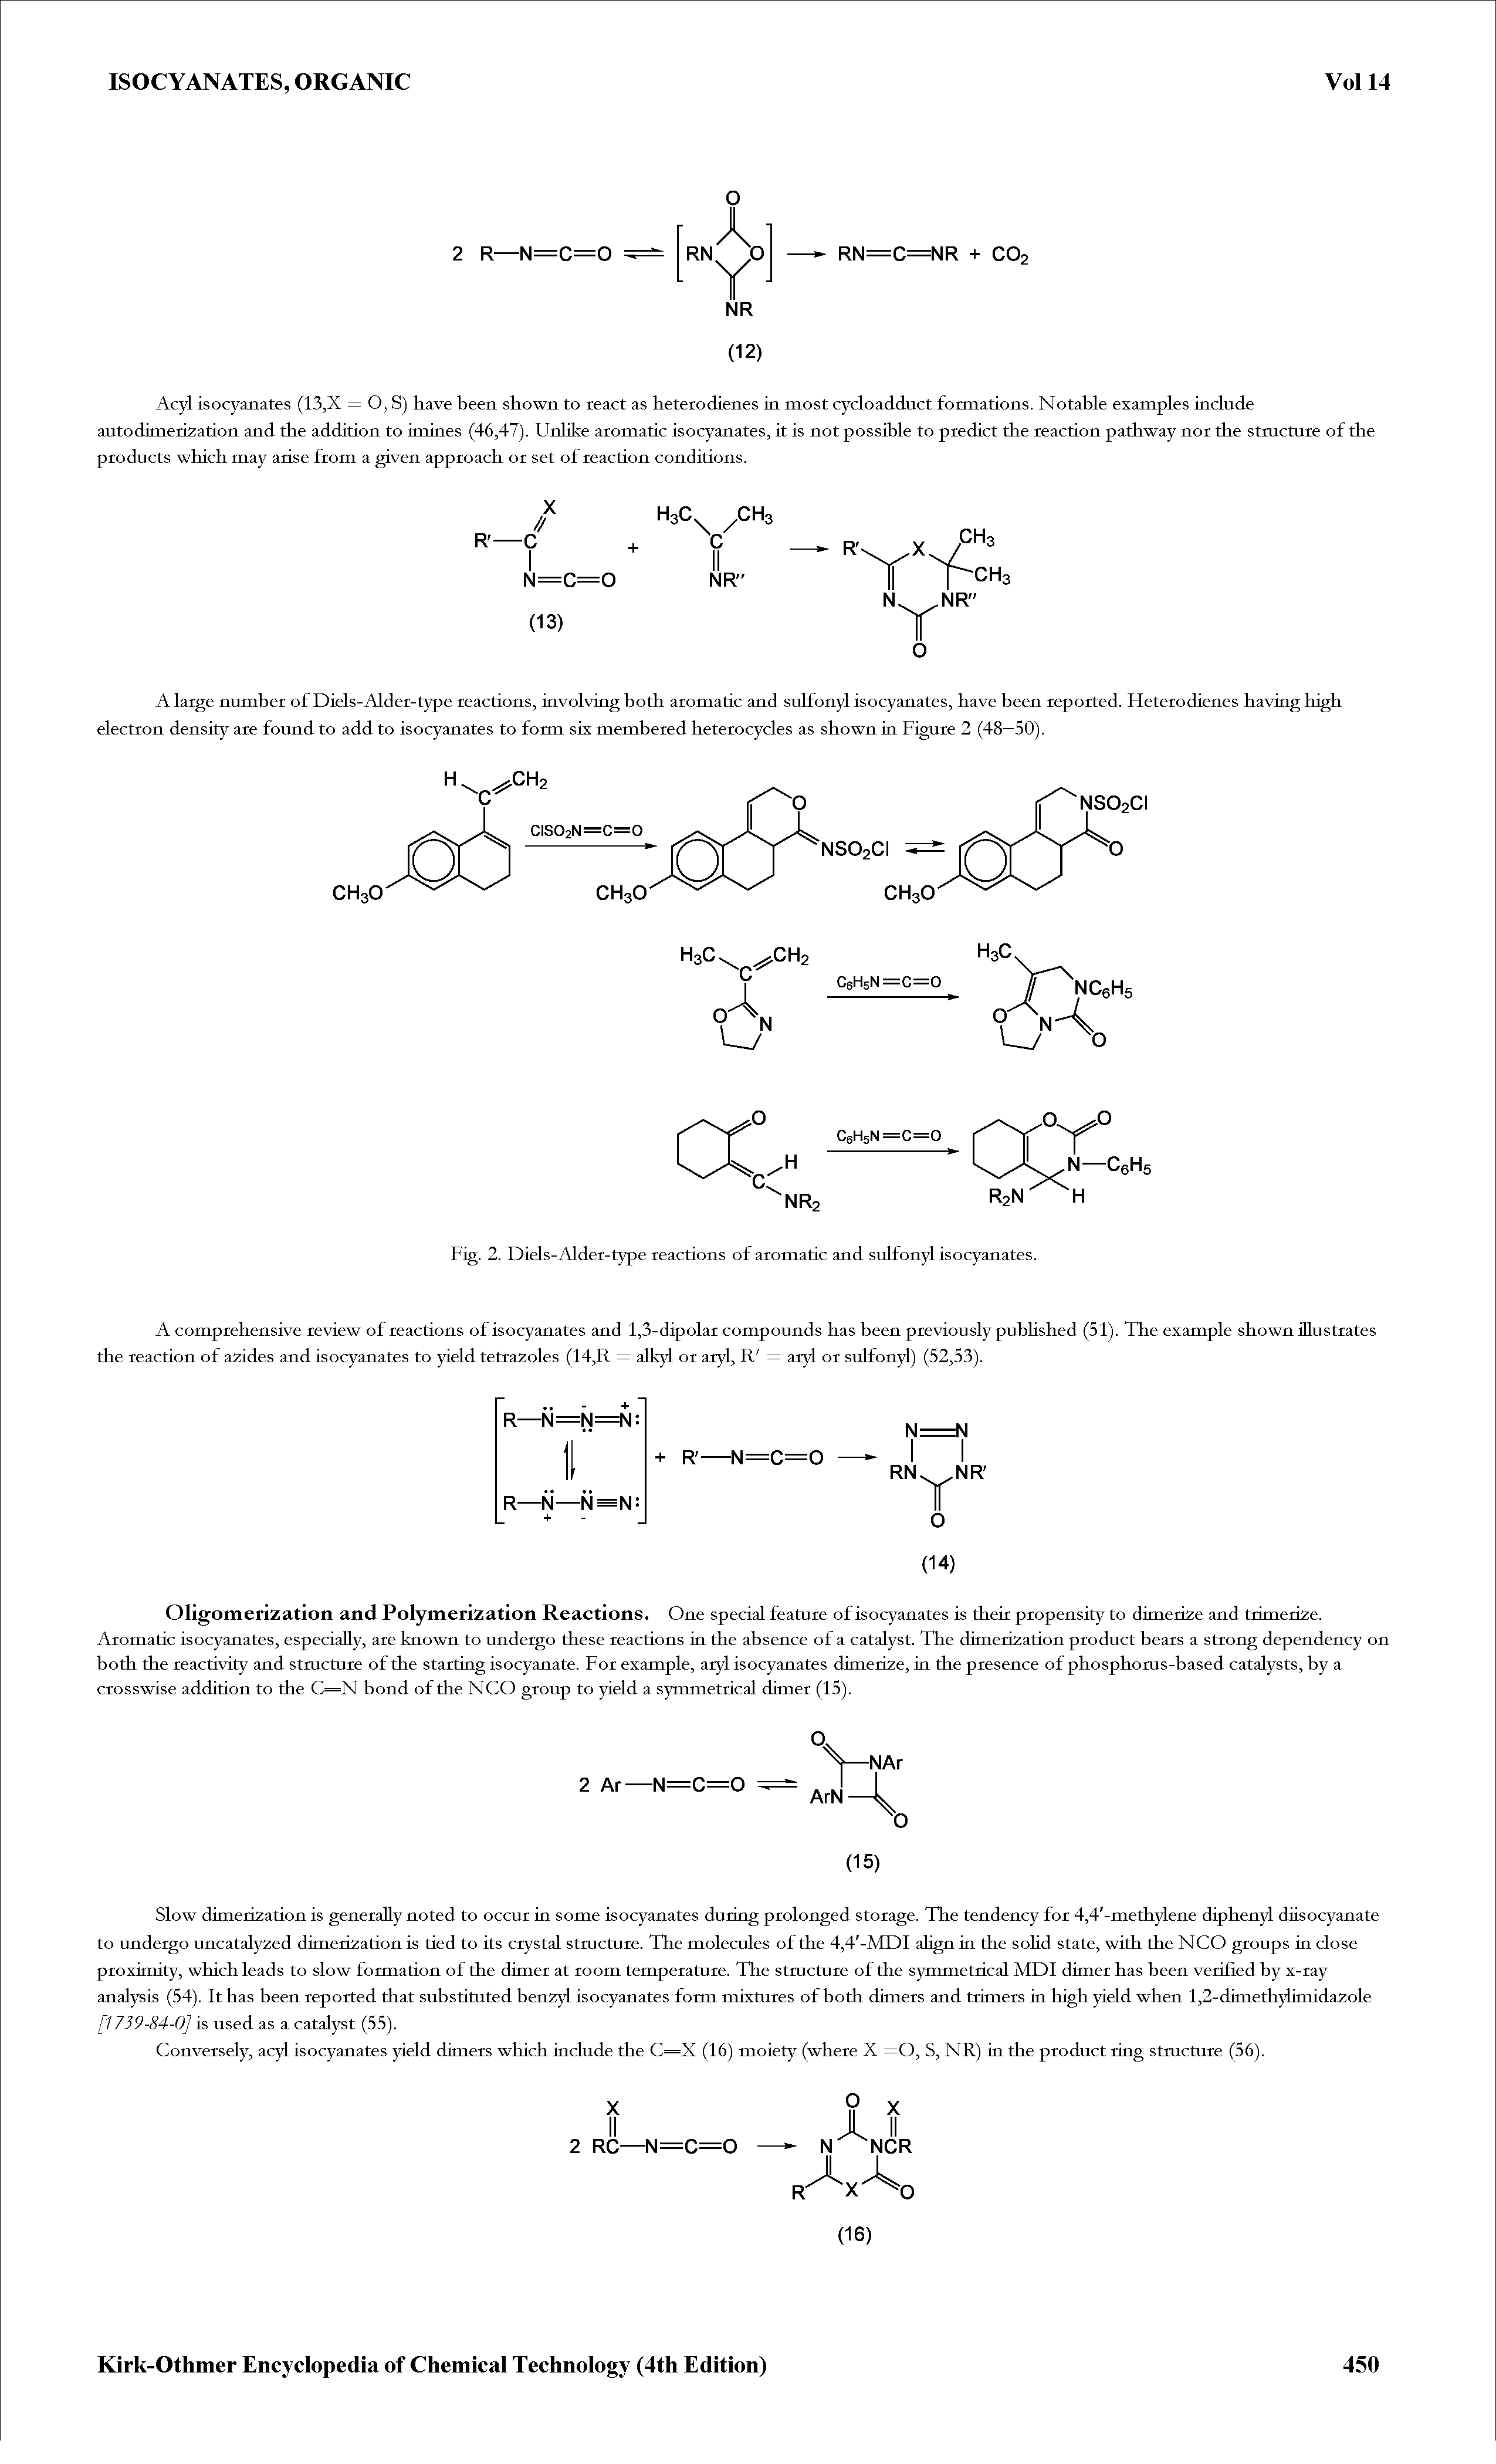 Fig. 2. Diels-Alder-type reactions of aromatic and sulfonyl isocyanates.